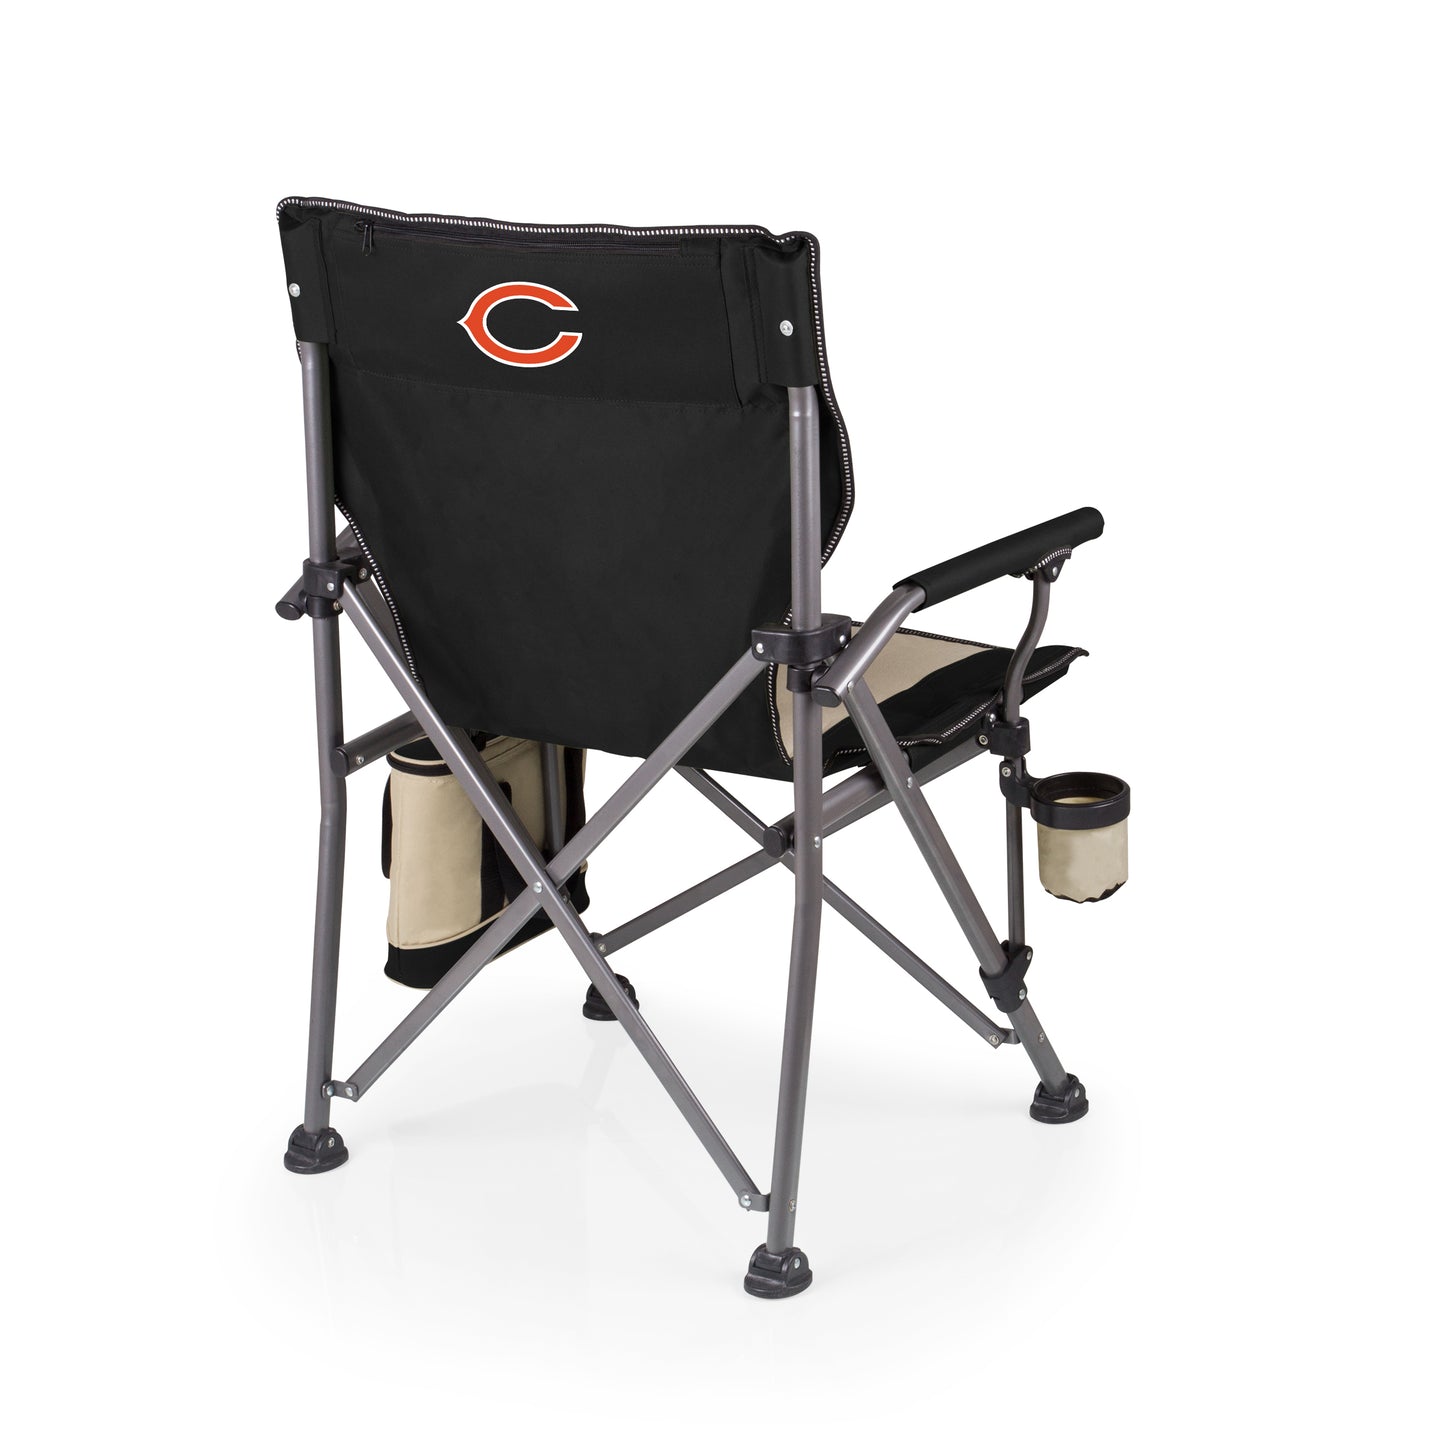 Chicago Bears - Outlander Folding Camping Chair with Cooler